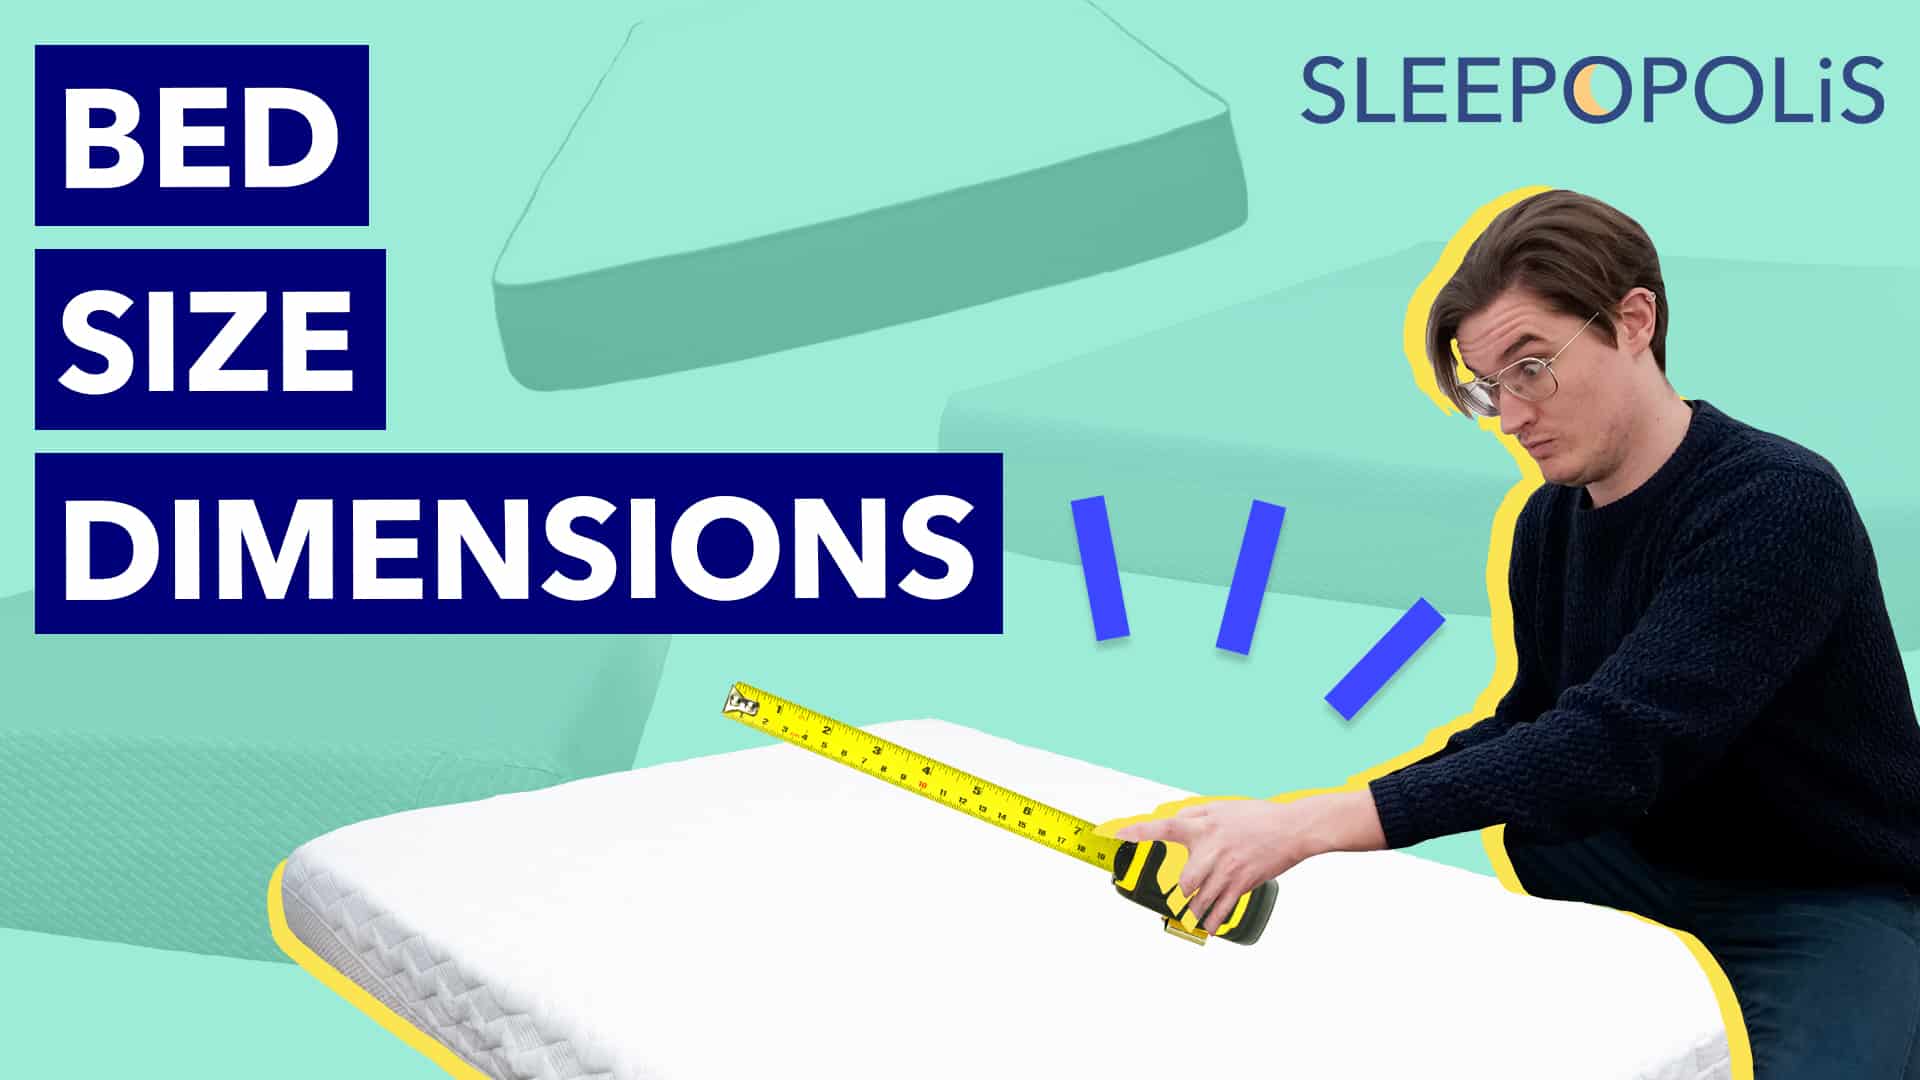 Mattress Sizes Chart and Bed Dimensions Guide